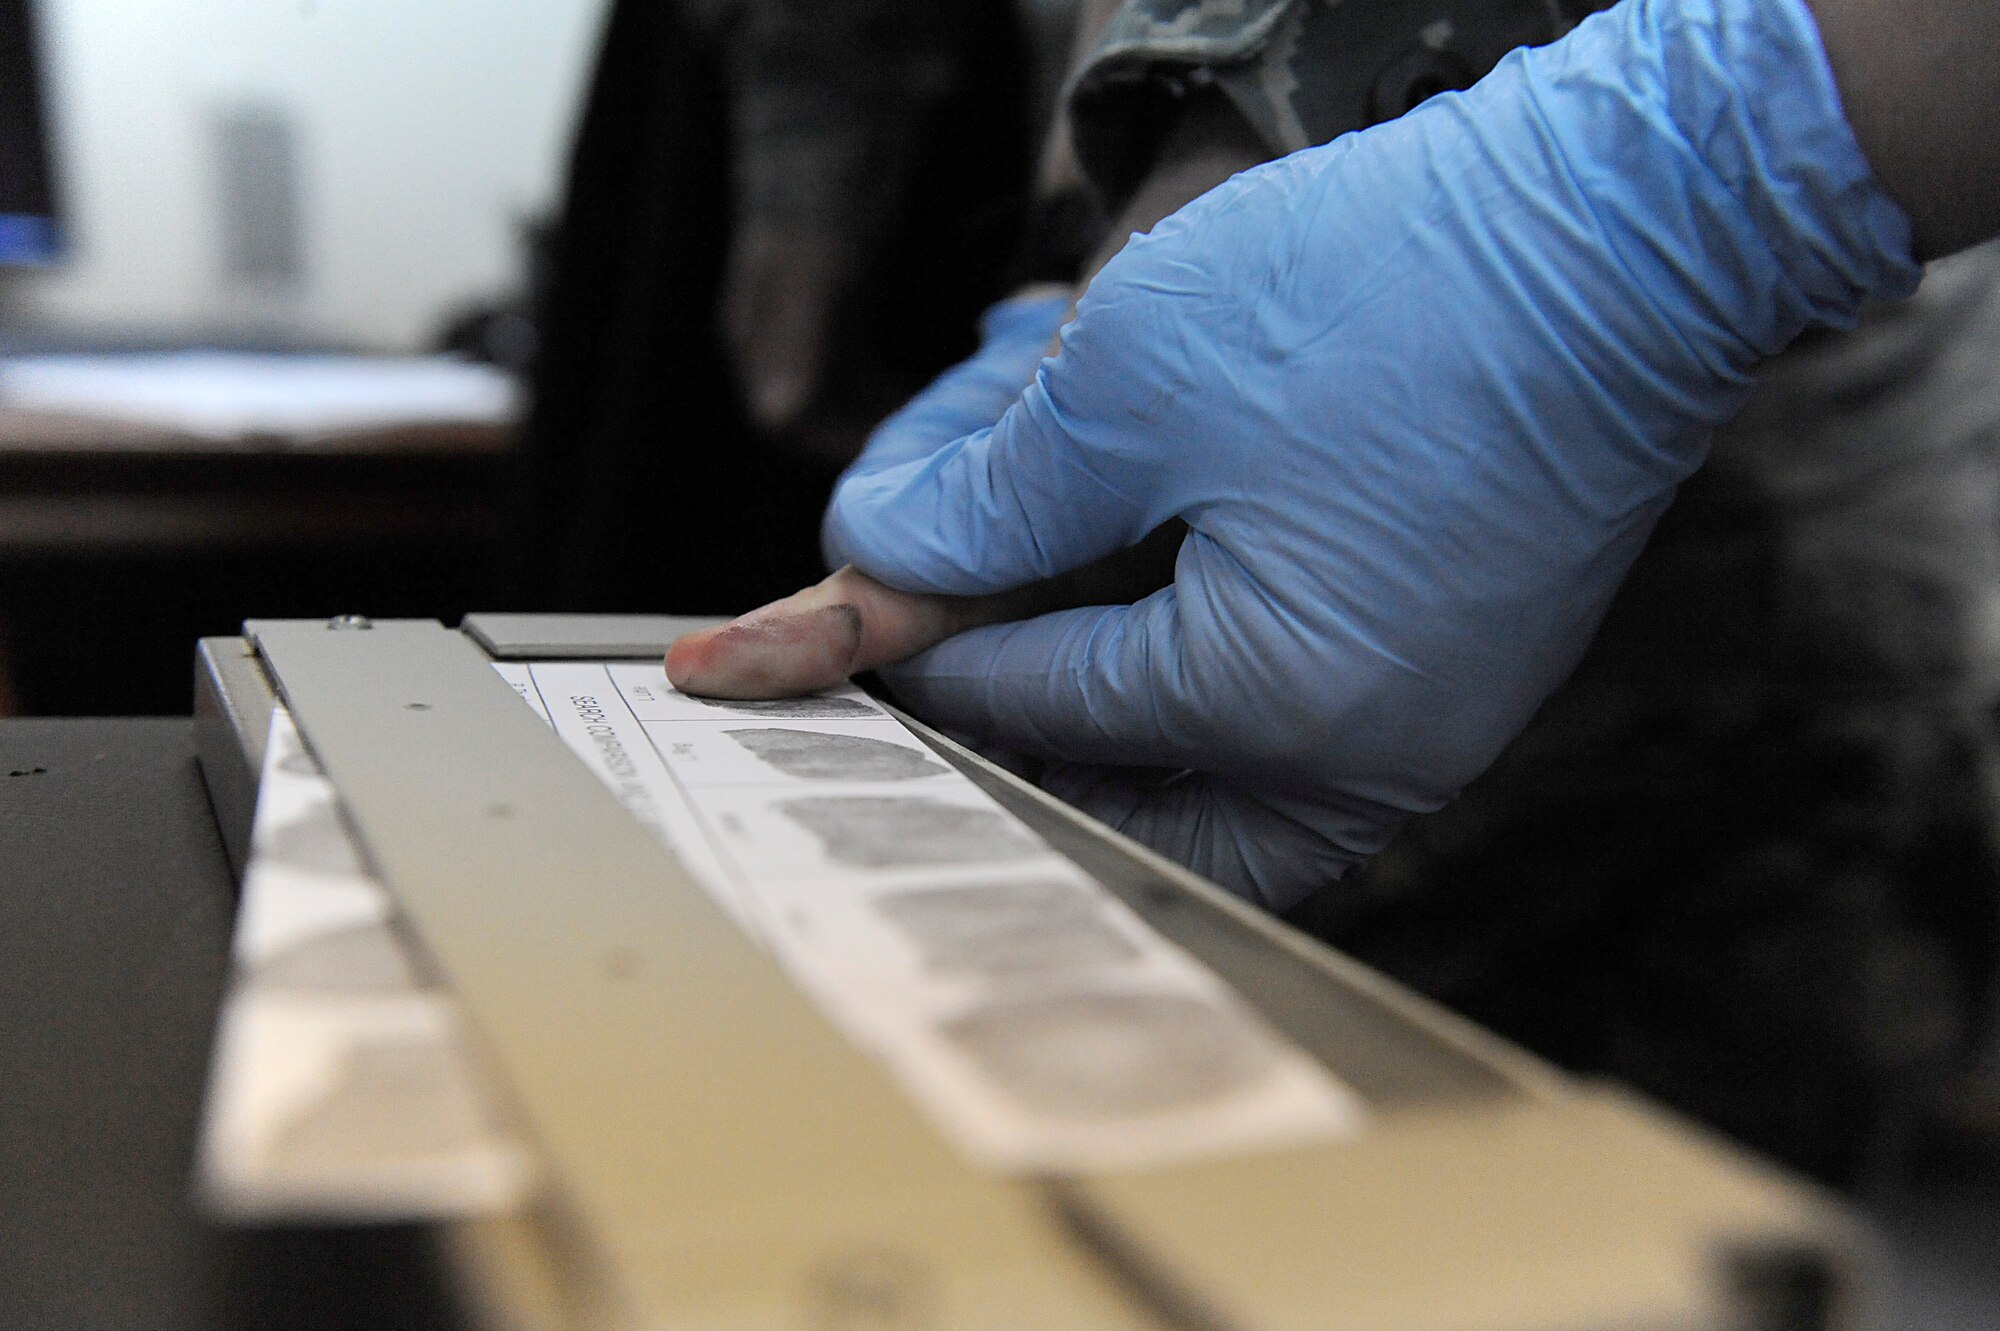 A "suspect" gets finger printed during a mock investigation at the 380th Air Expeditionary Wing at an undisclosed location in Southwest Asia, April 11. Prints were taken from a glass and will be matched against the ones taken of the suspect to determine who was involved with the crime. (U.S. Air Force photo by Senior Airman Brian J. Ellis) (Released)